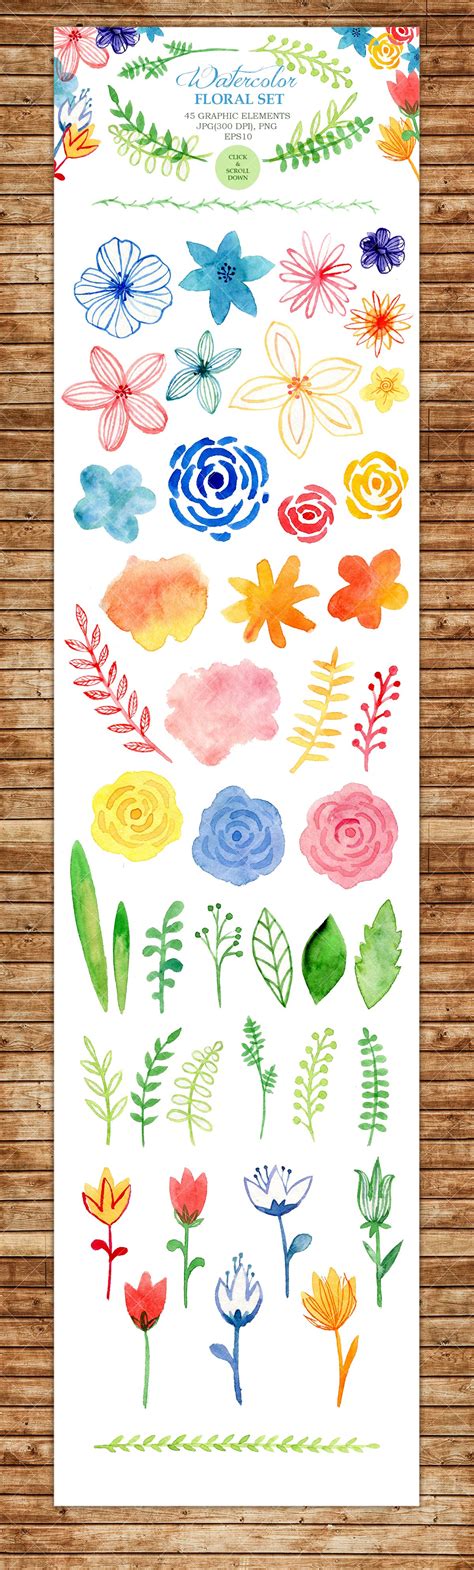 Watercolor Floral Set ~ Graphic Objects ~ Creative Market